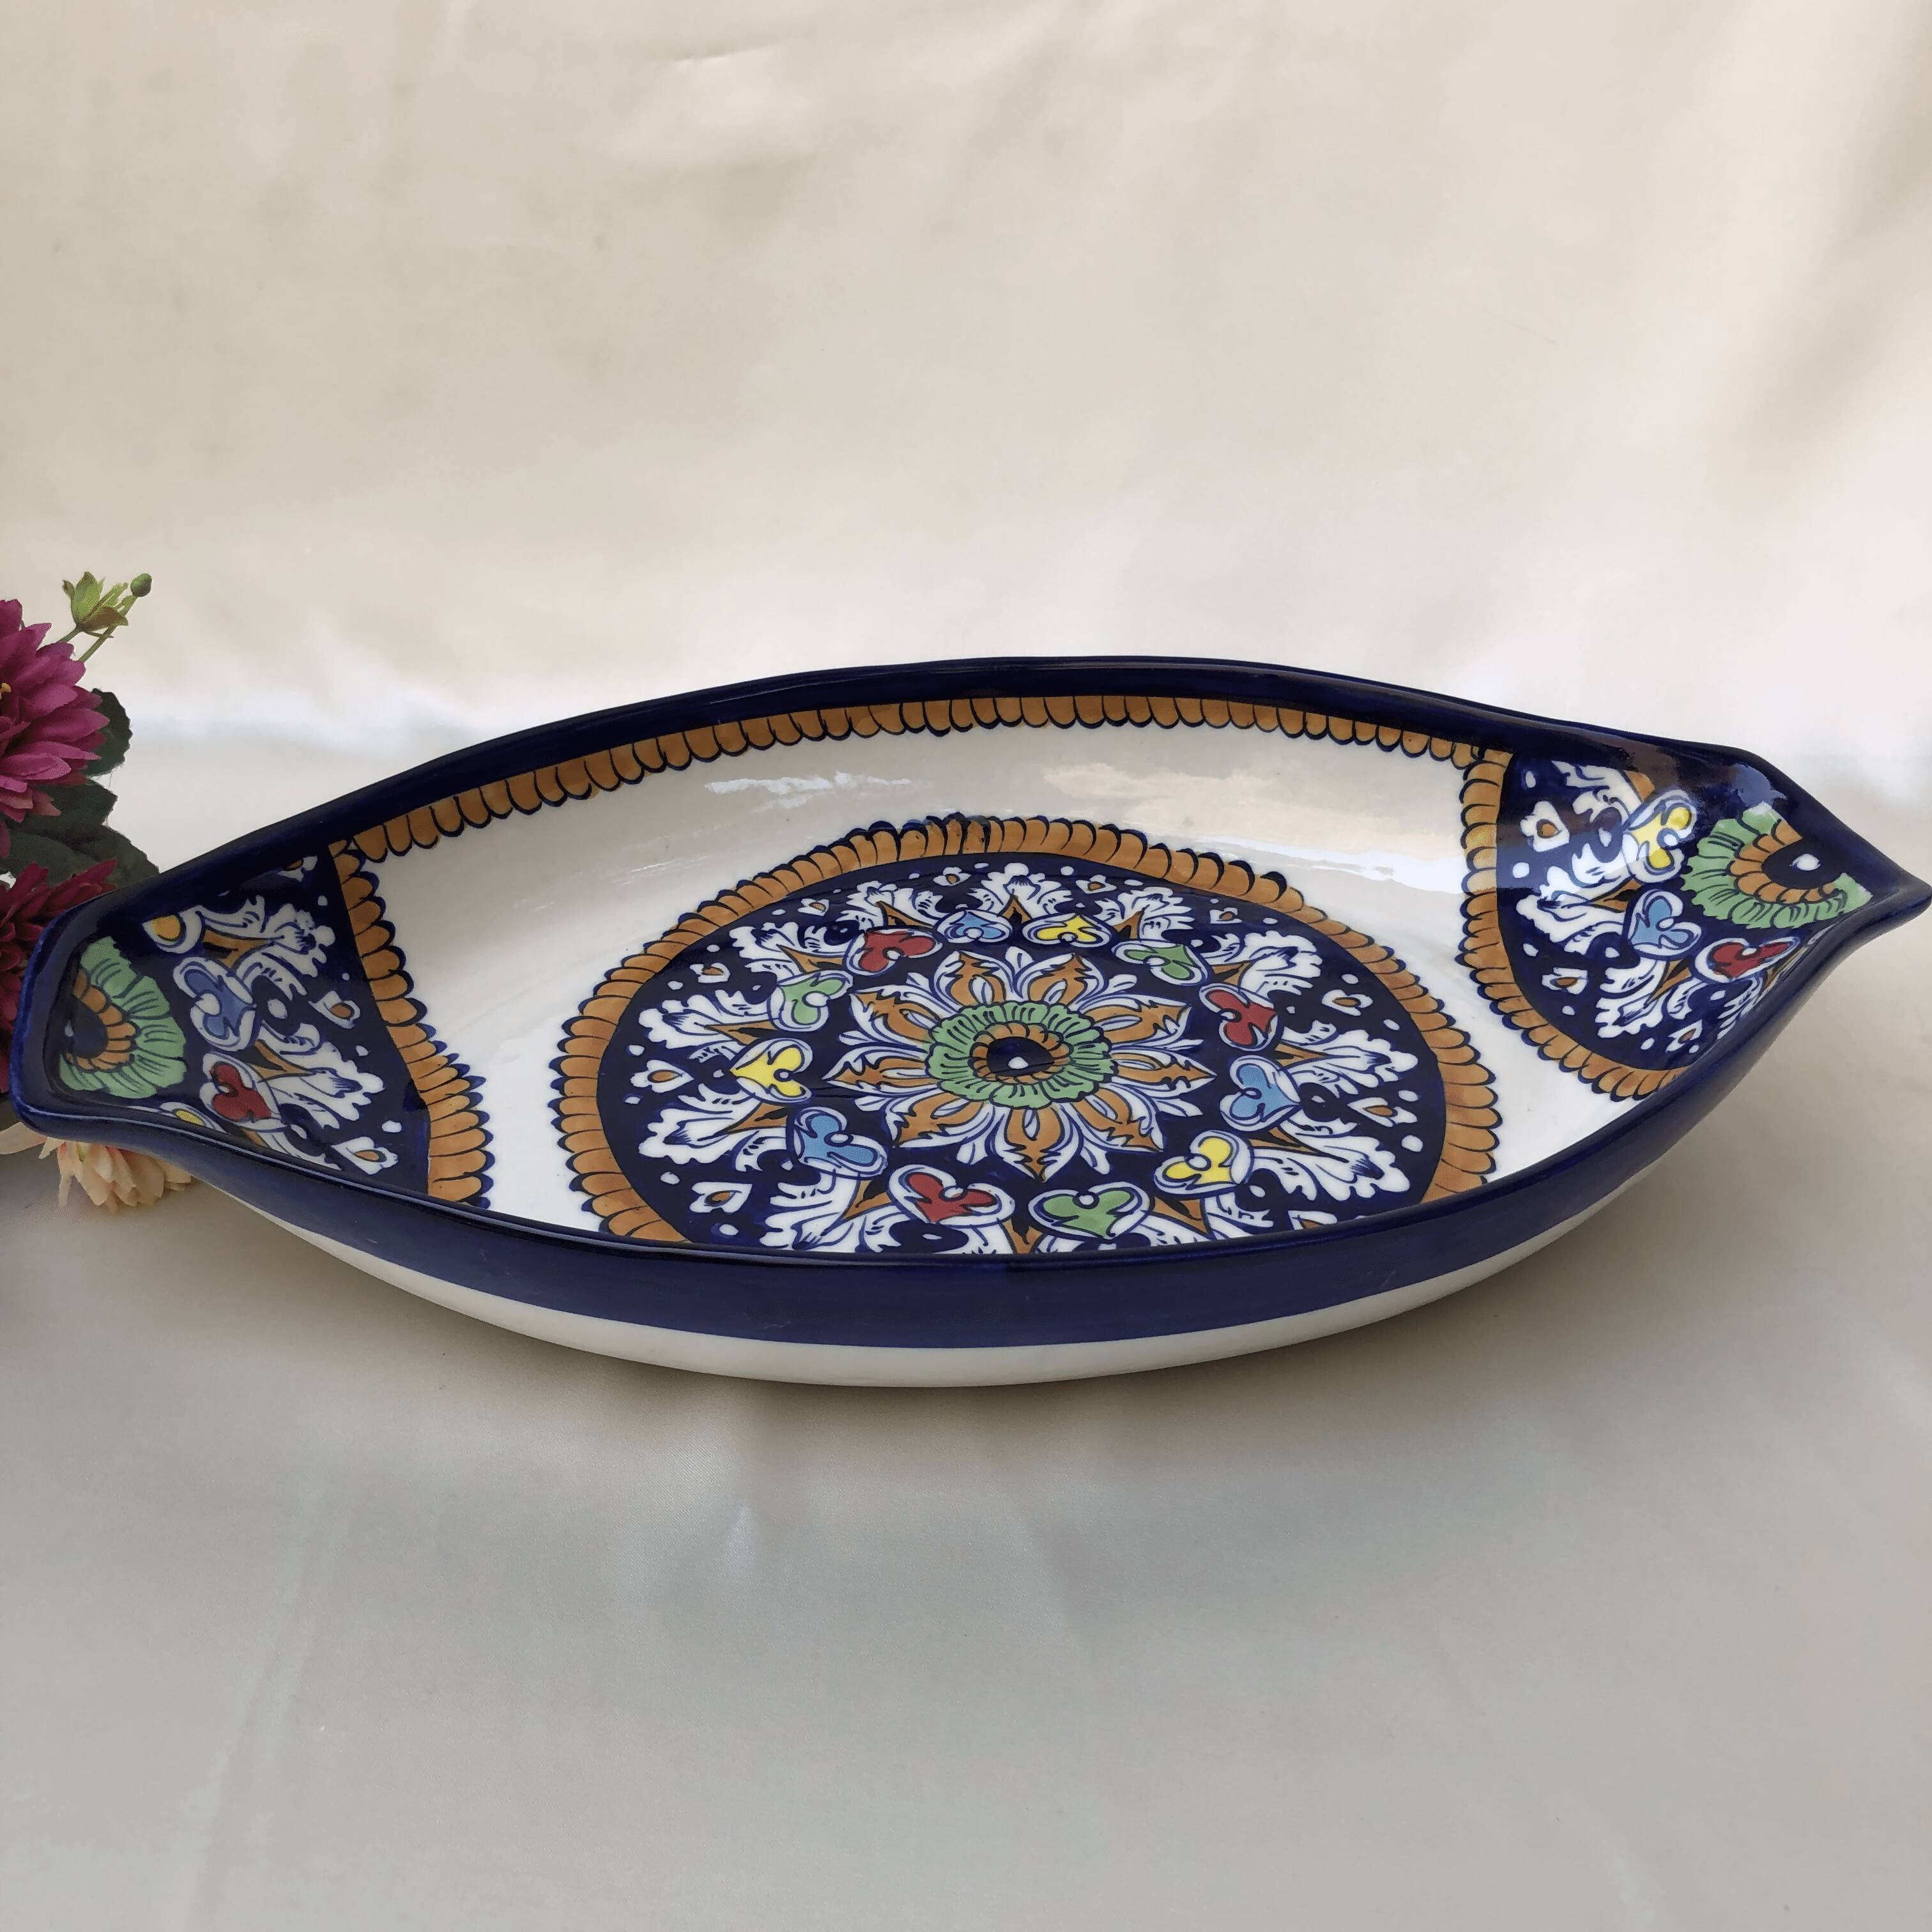 New Tranquility Oval Dish